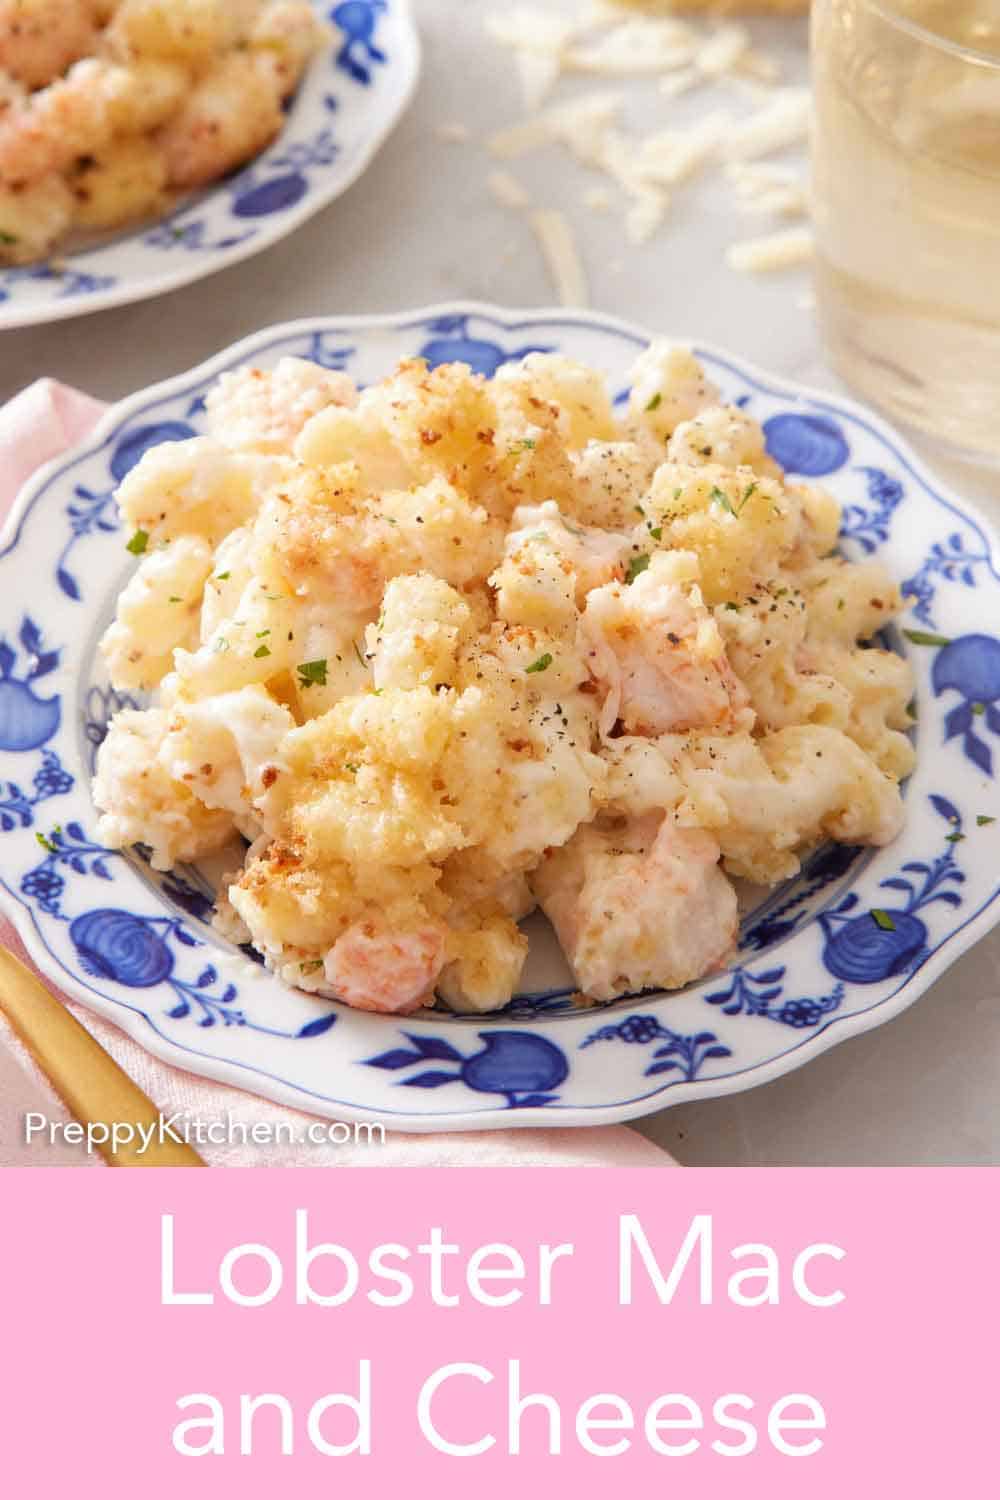 Lobster Mac and Cheese - Preppy Kitchen